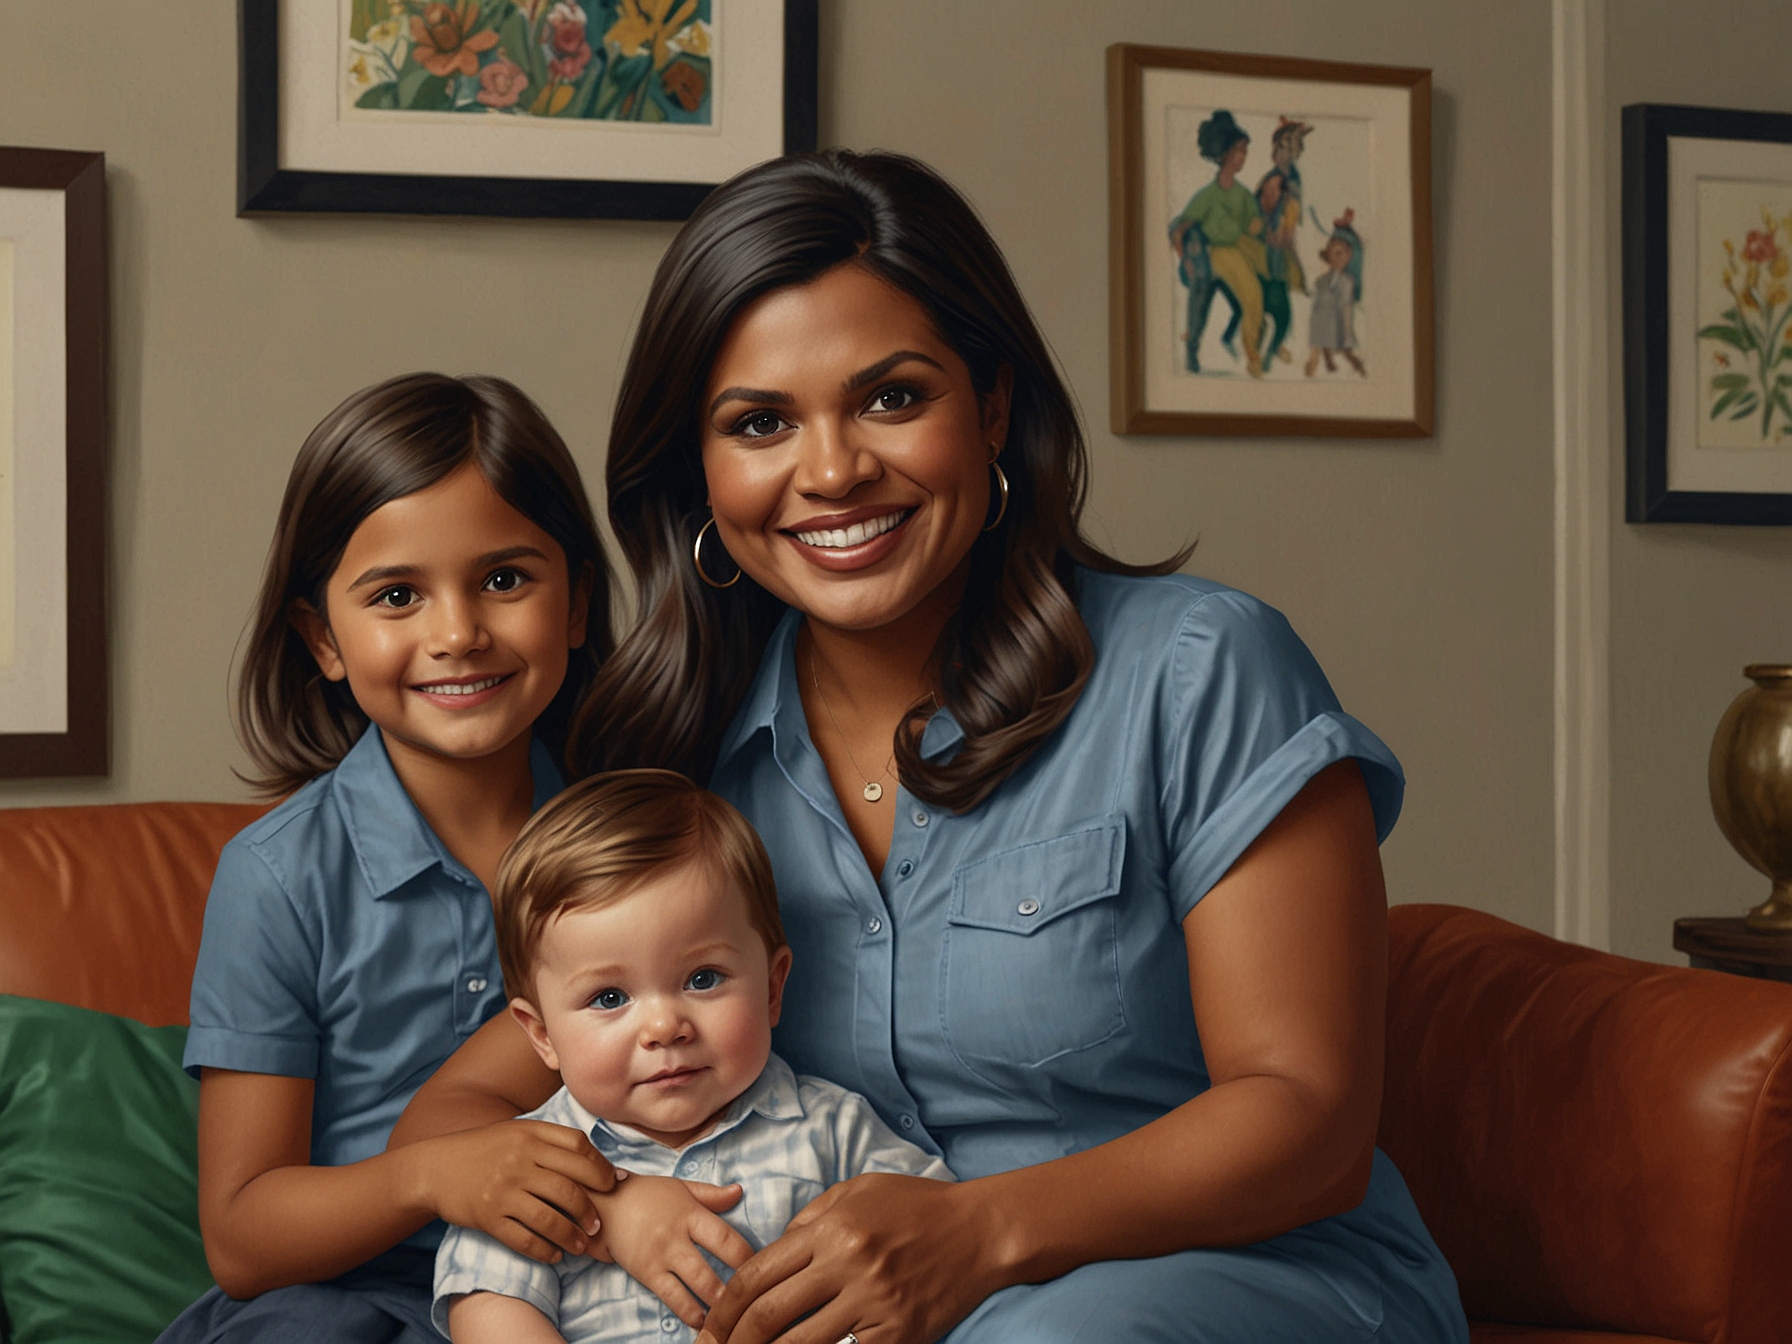 Mindy Kaling is seen smiling with her three kids: newborn Anne in her arms, 6-year-old Katherine standing proudly next to her, and 3-year-old Spencer curiously peeking at his baby sister.